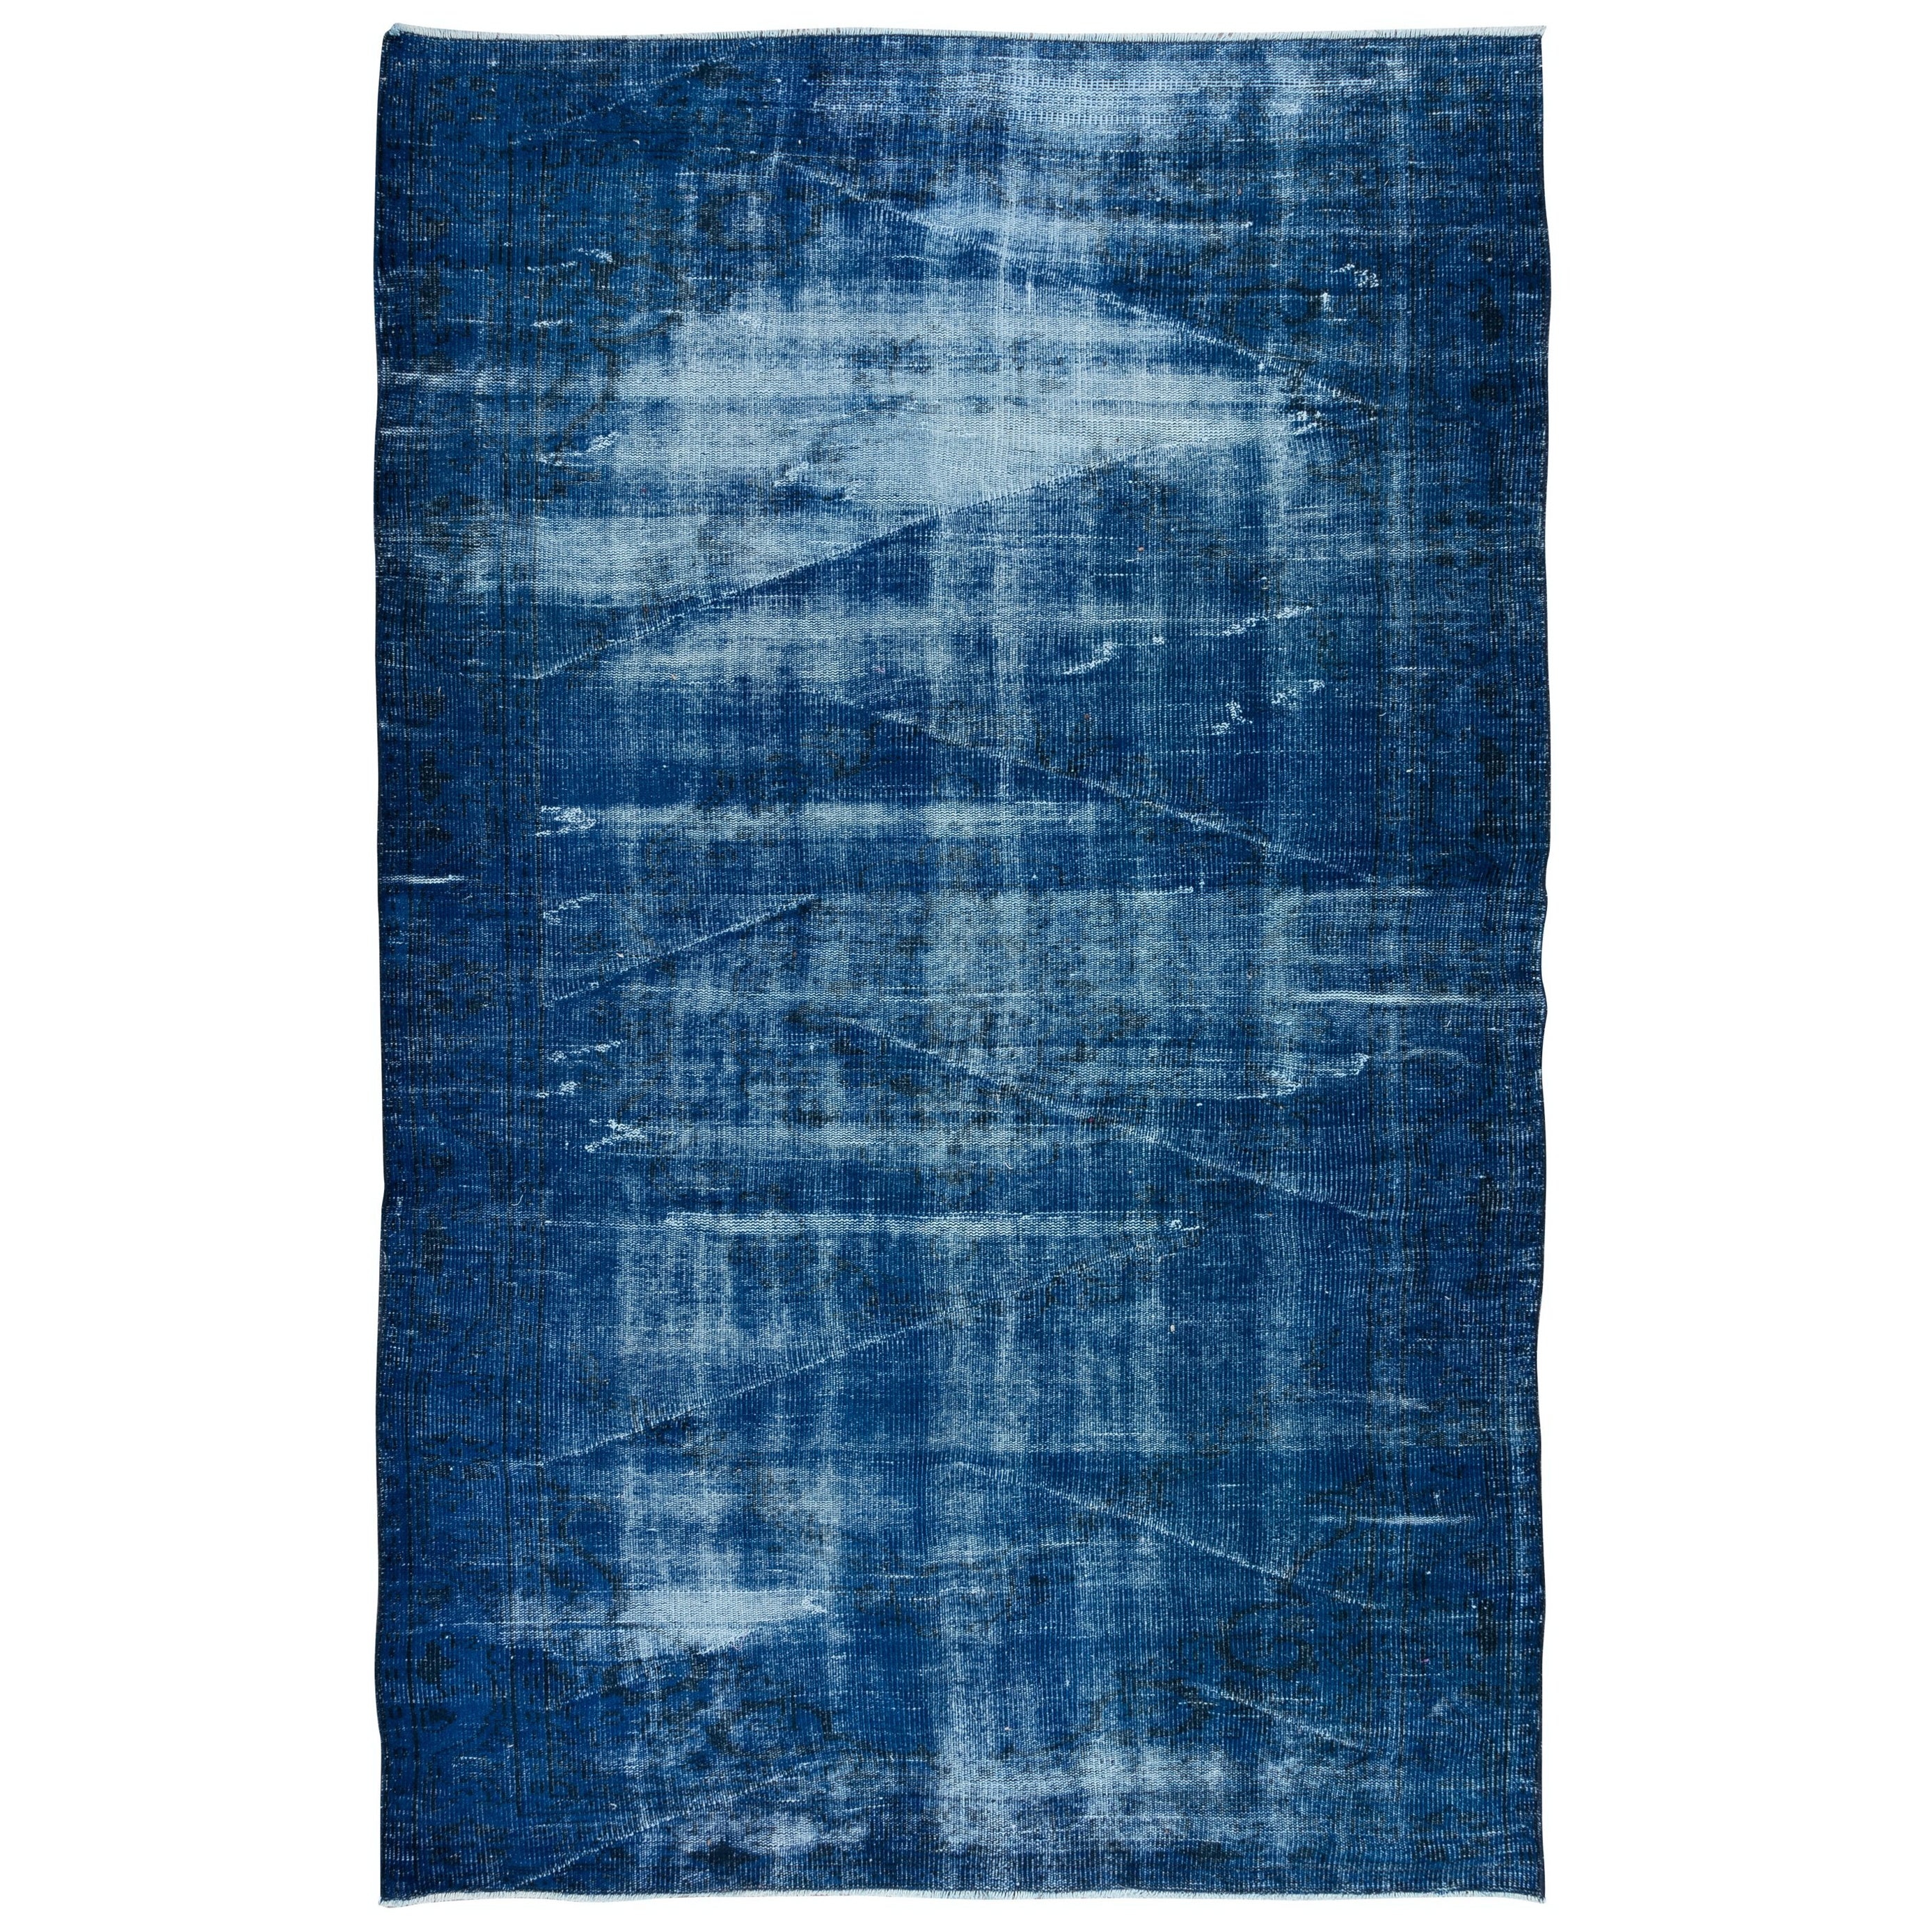 6x9.2 Ft Handknotted with Shabby Chic Blue Area Rug, Distressed Look Wool Carpet For Sale